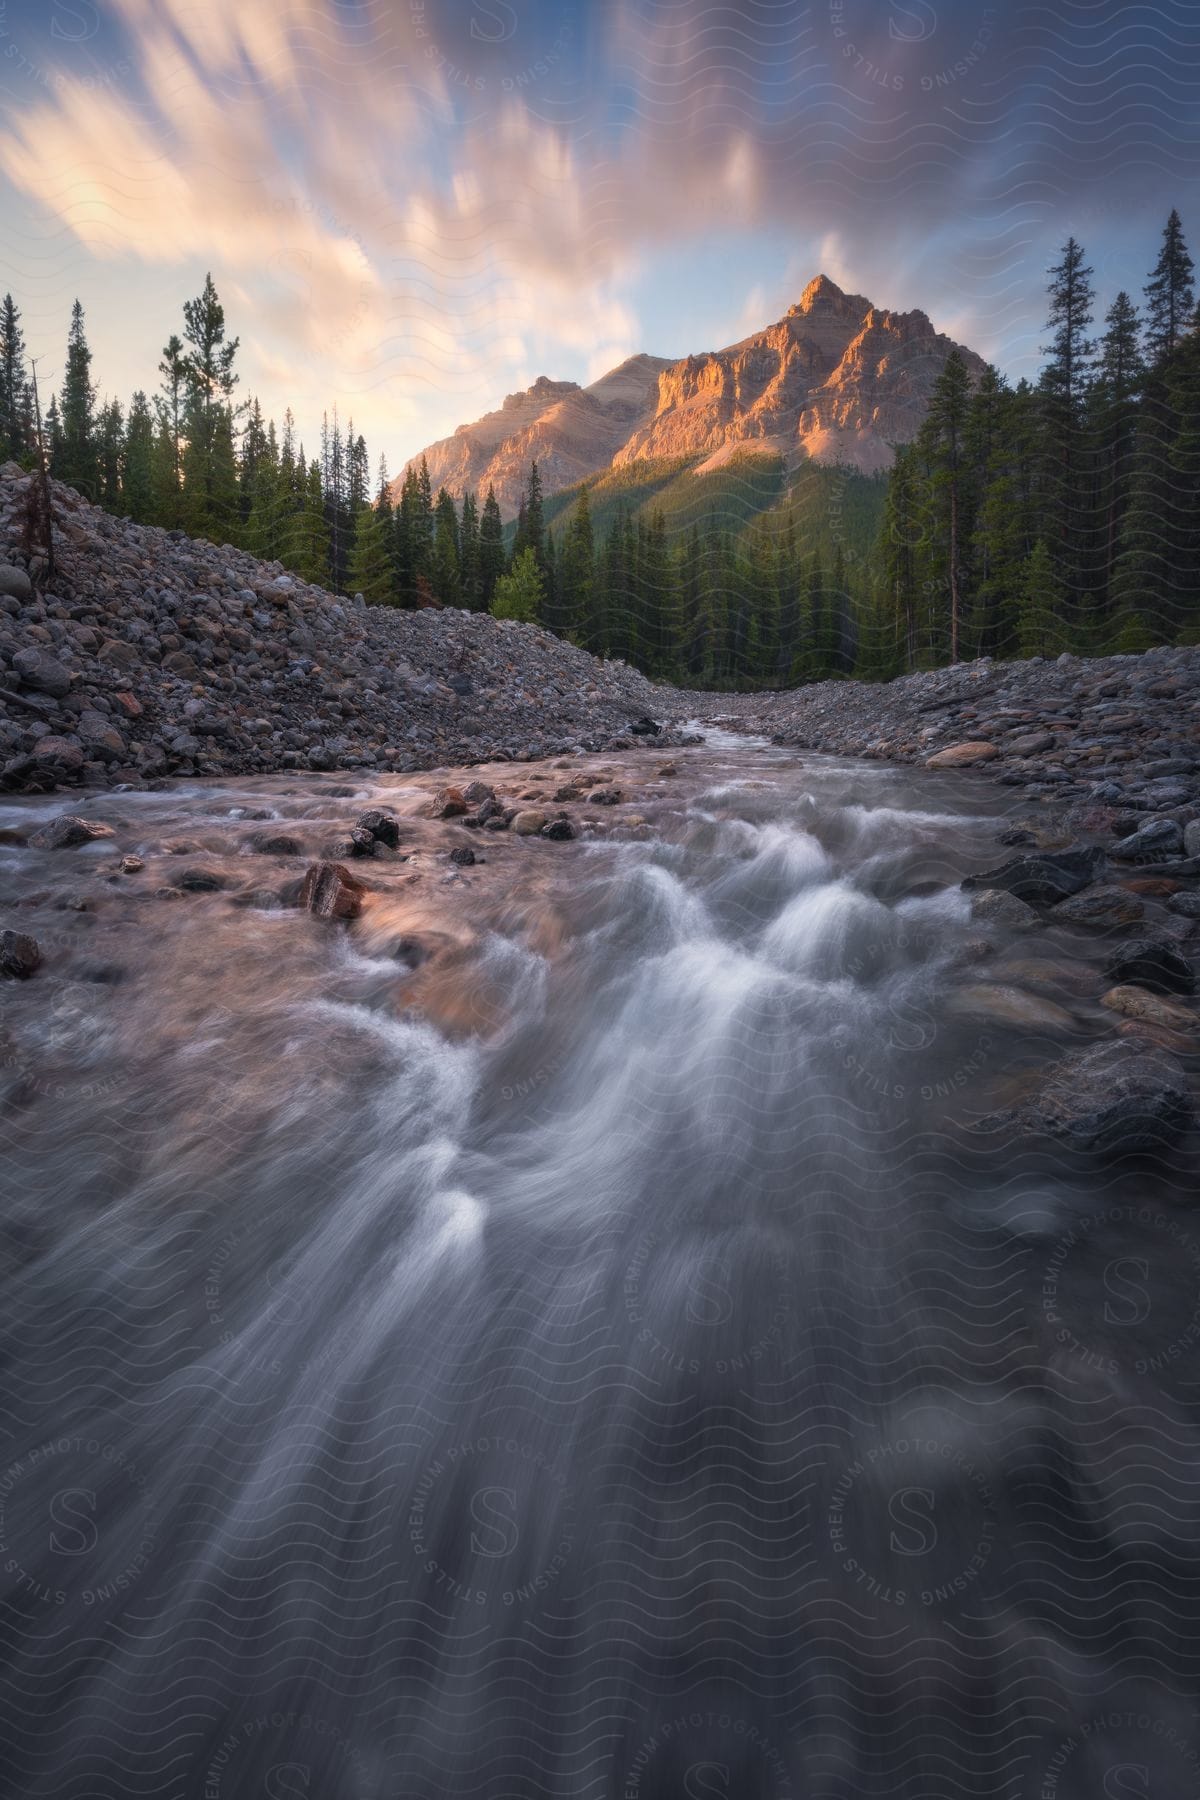 A sunrise illuminating a rocky mountain peak with a stream in the foreground